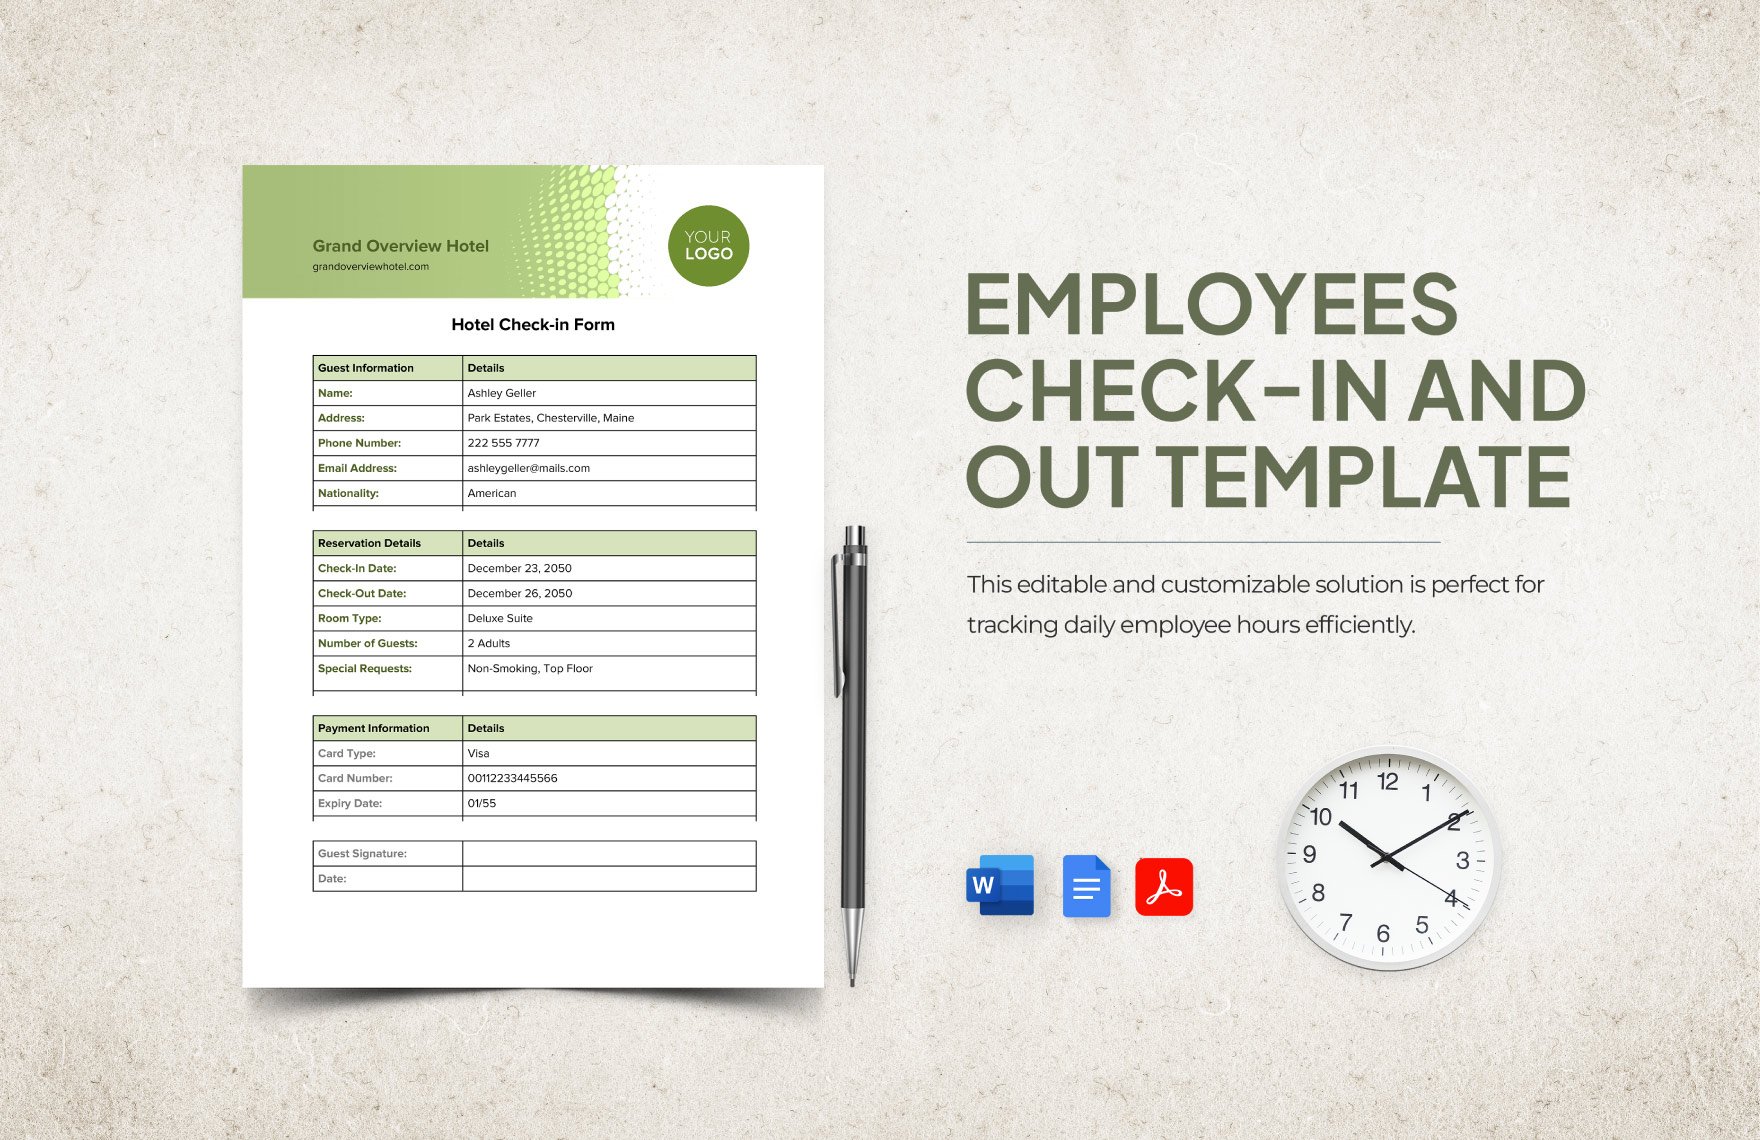 Employees Check-in and Out Template in Word, Google Docs, PDF